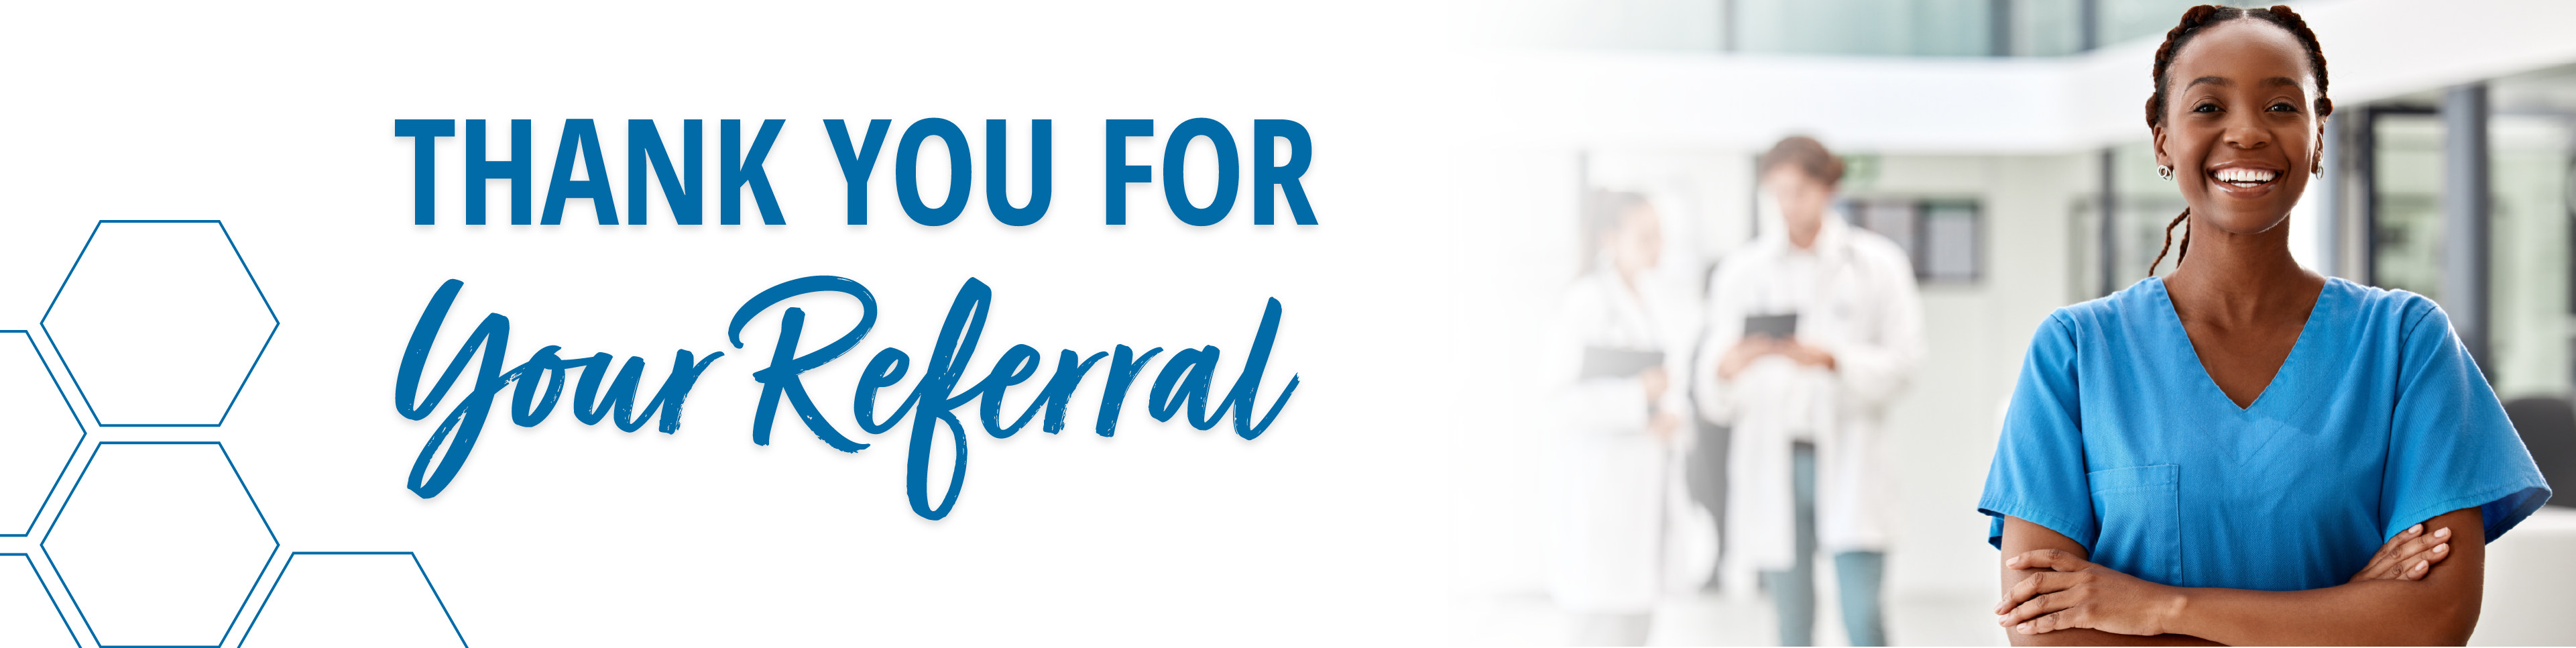 Thank you for your Referral